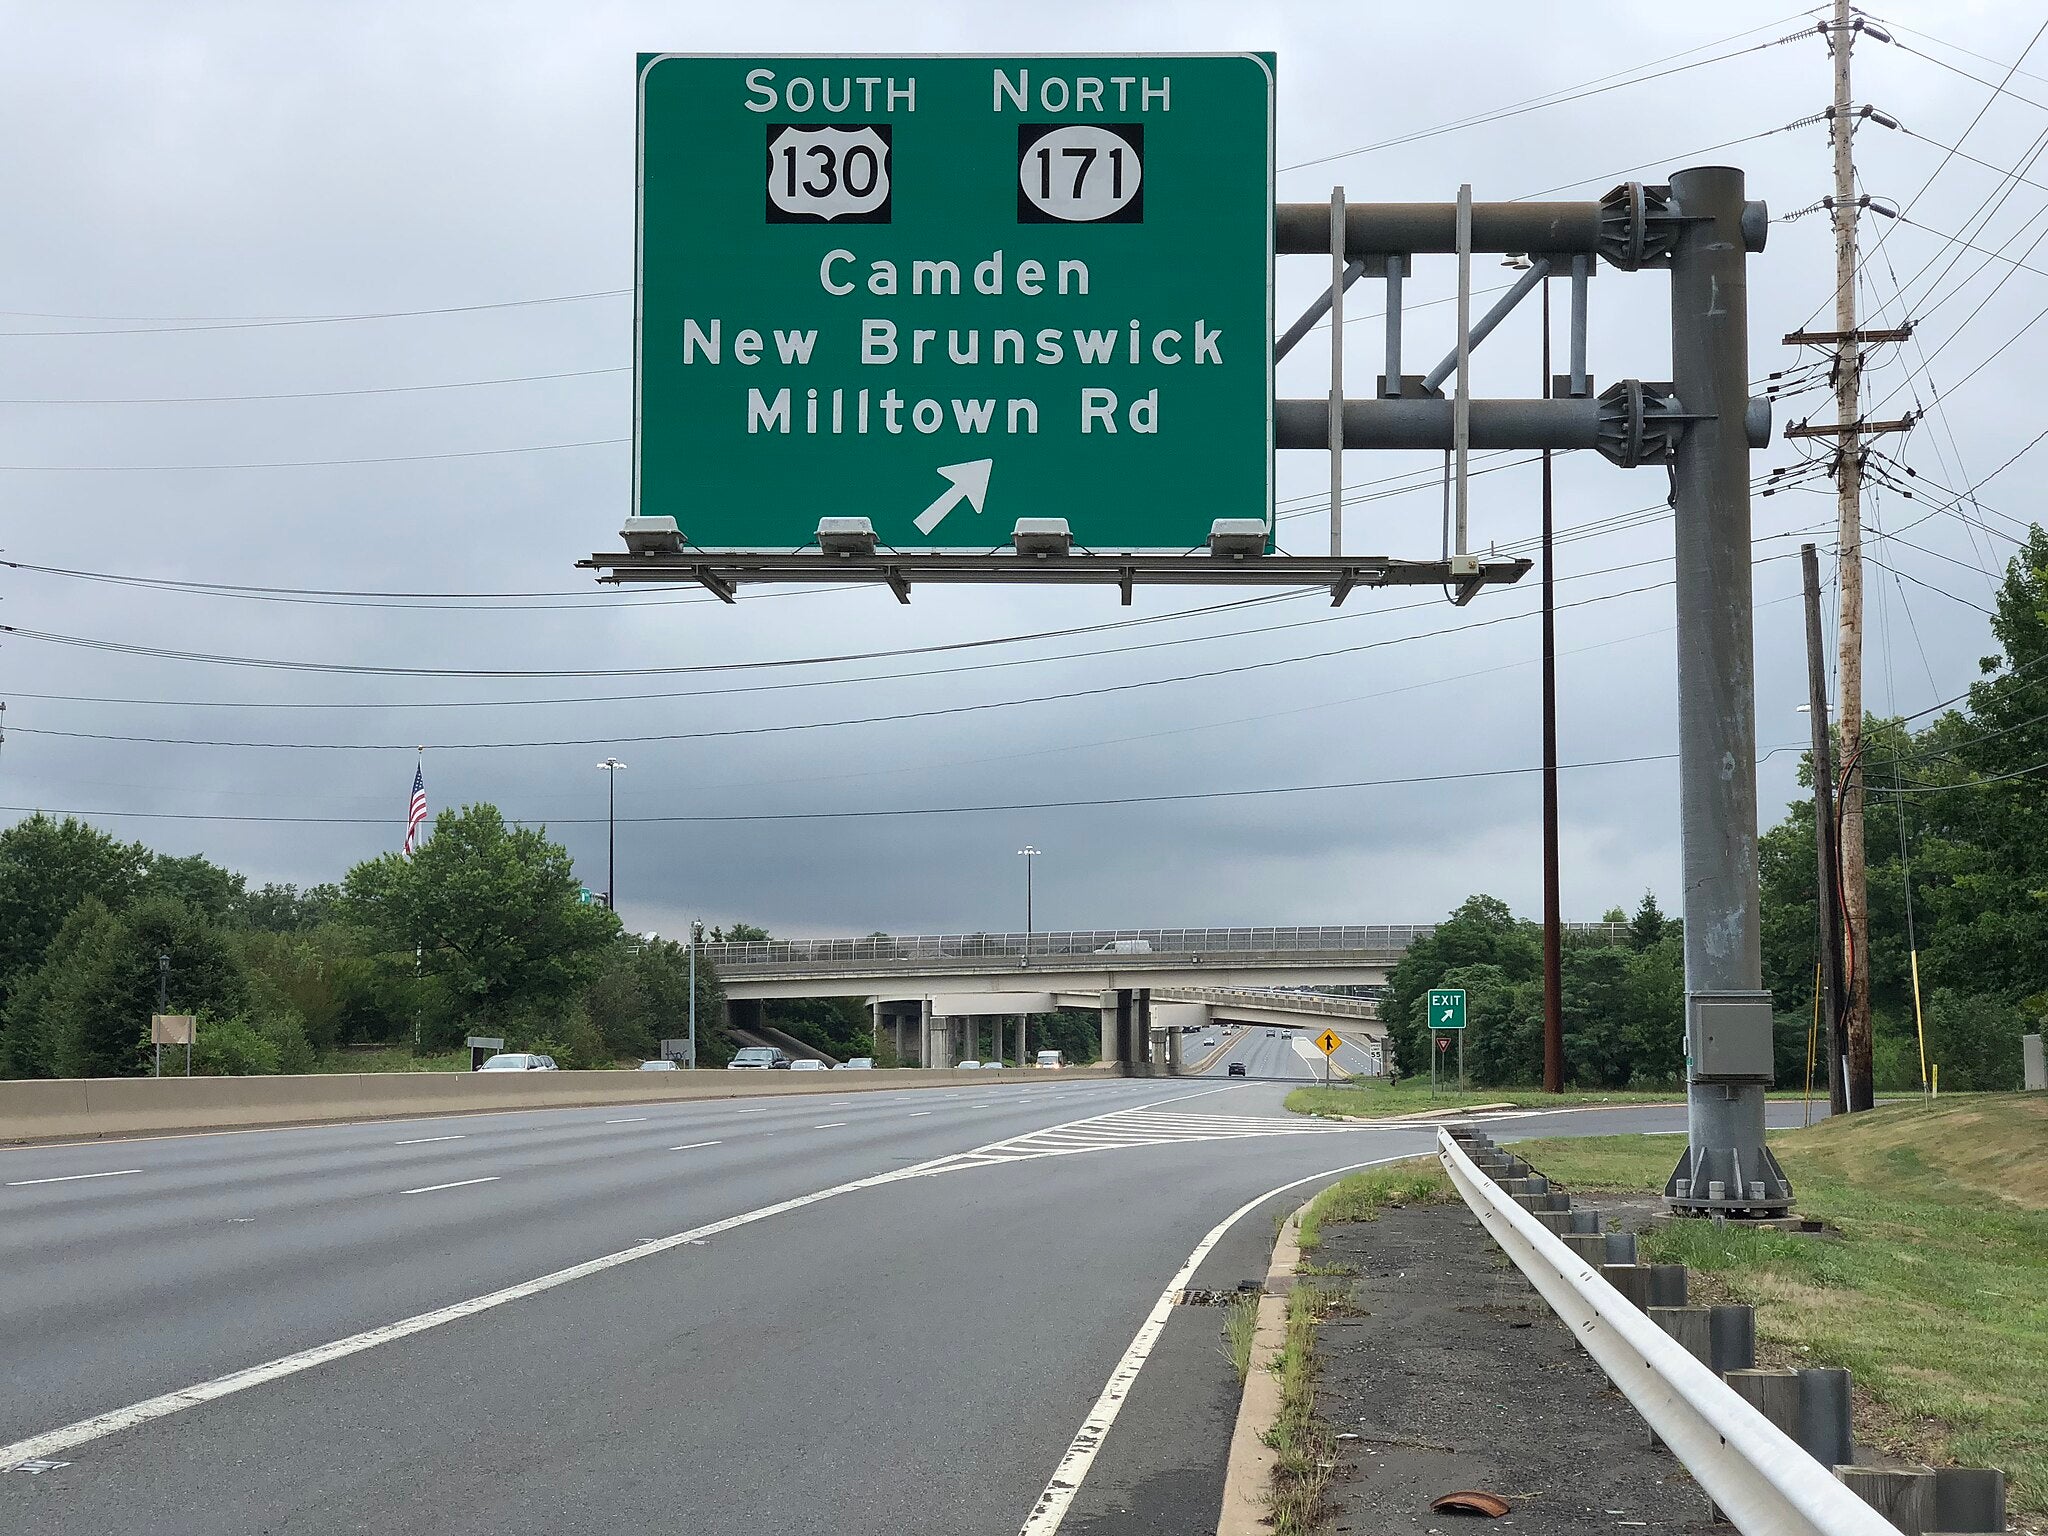 Drivers will soon be able to use more of the shoulder on a Central Jersey roadway